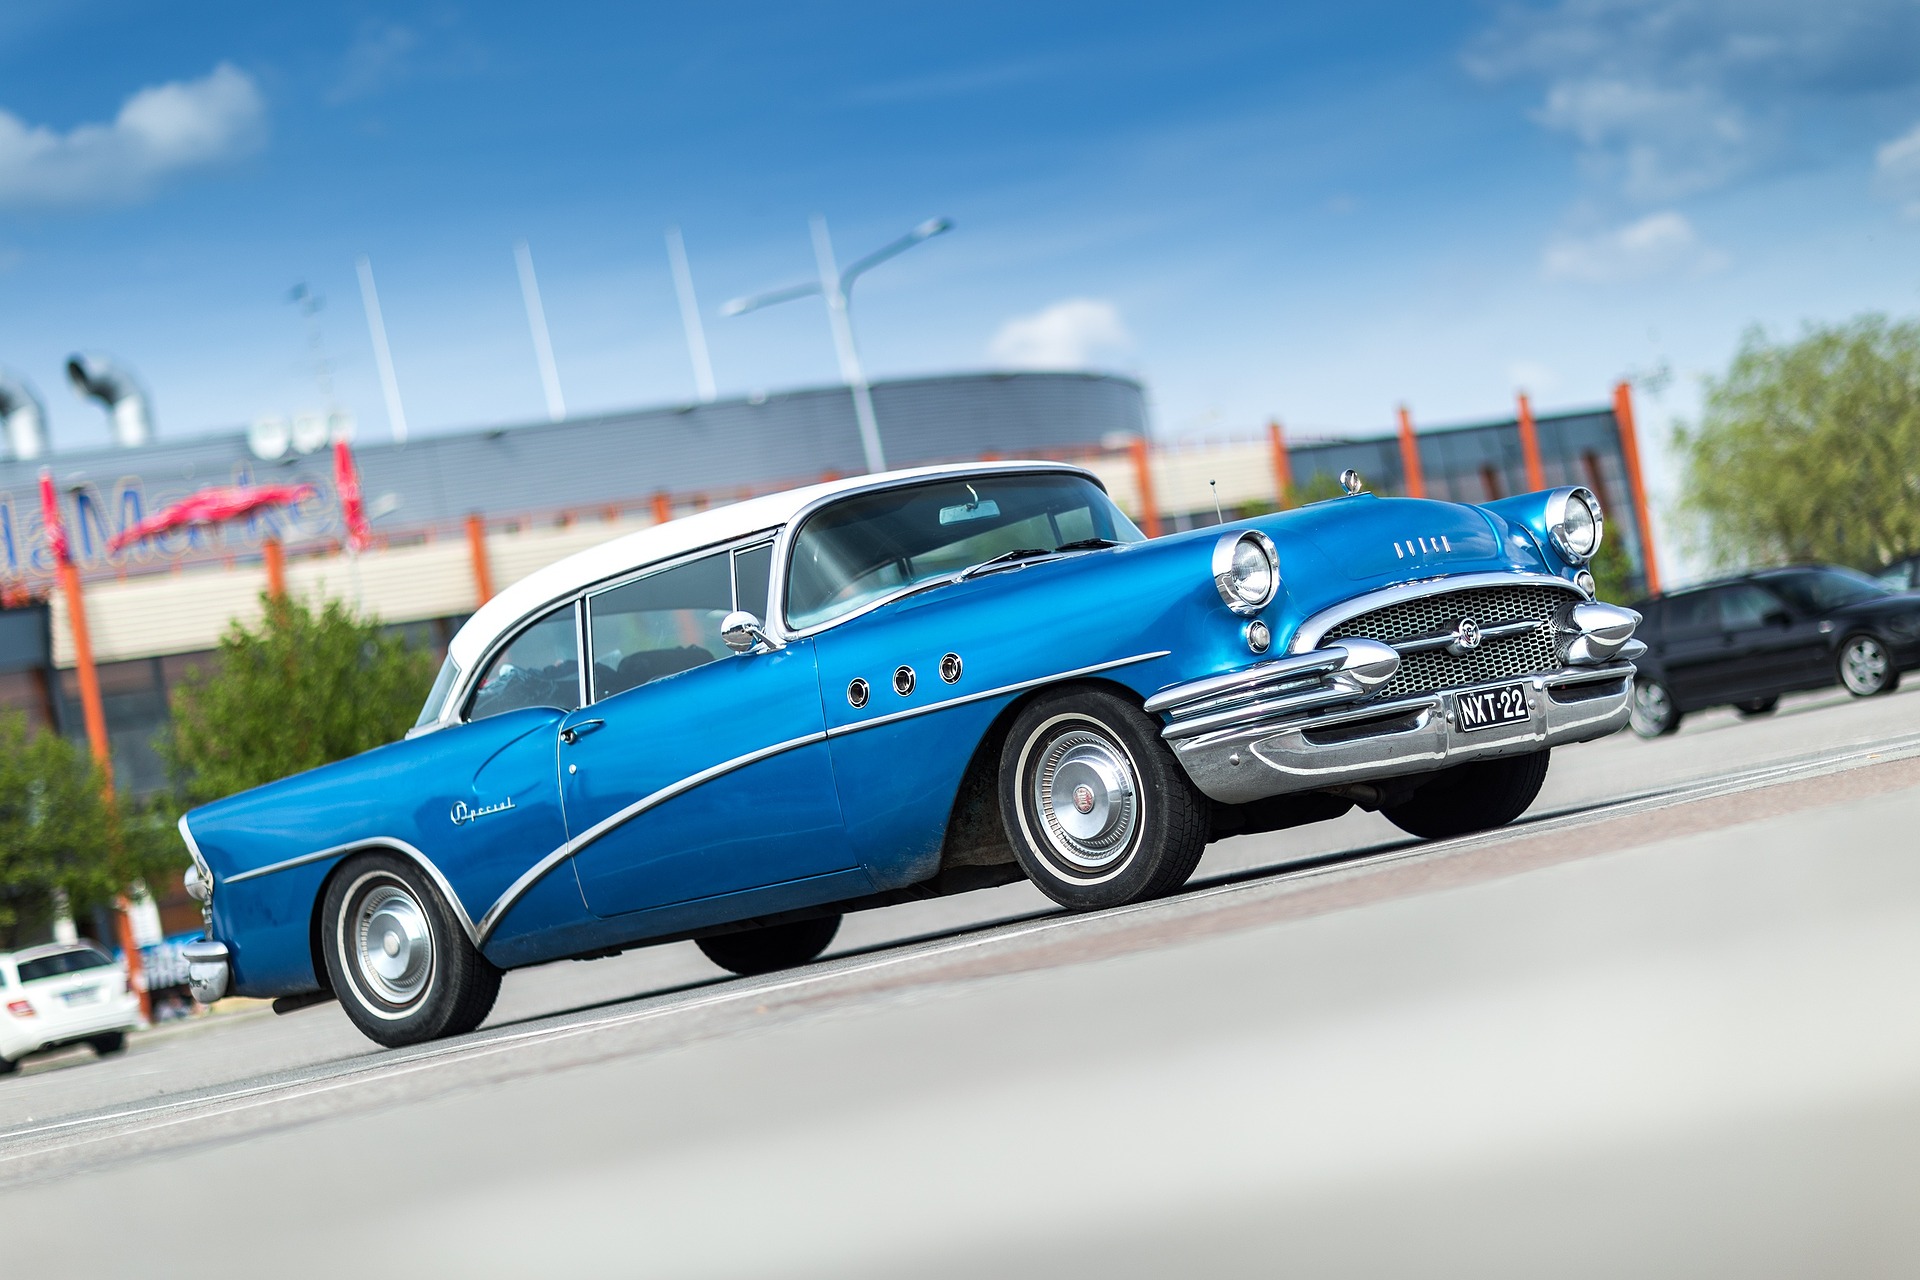 Classic, Antique, and Vintage Cars: Are They Different from Each Other?